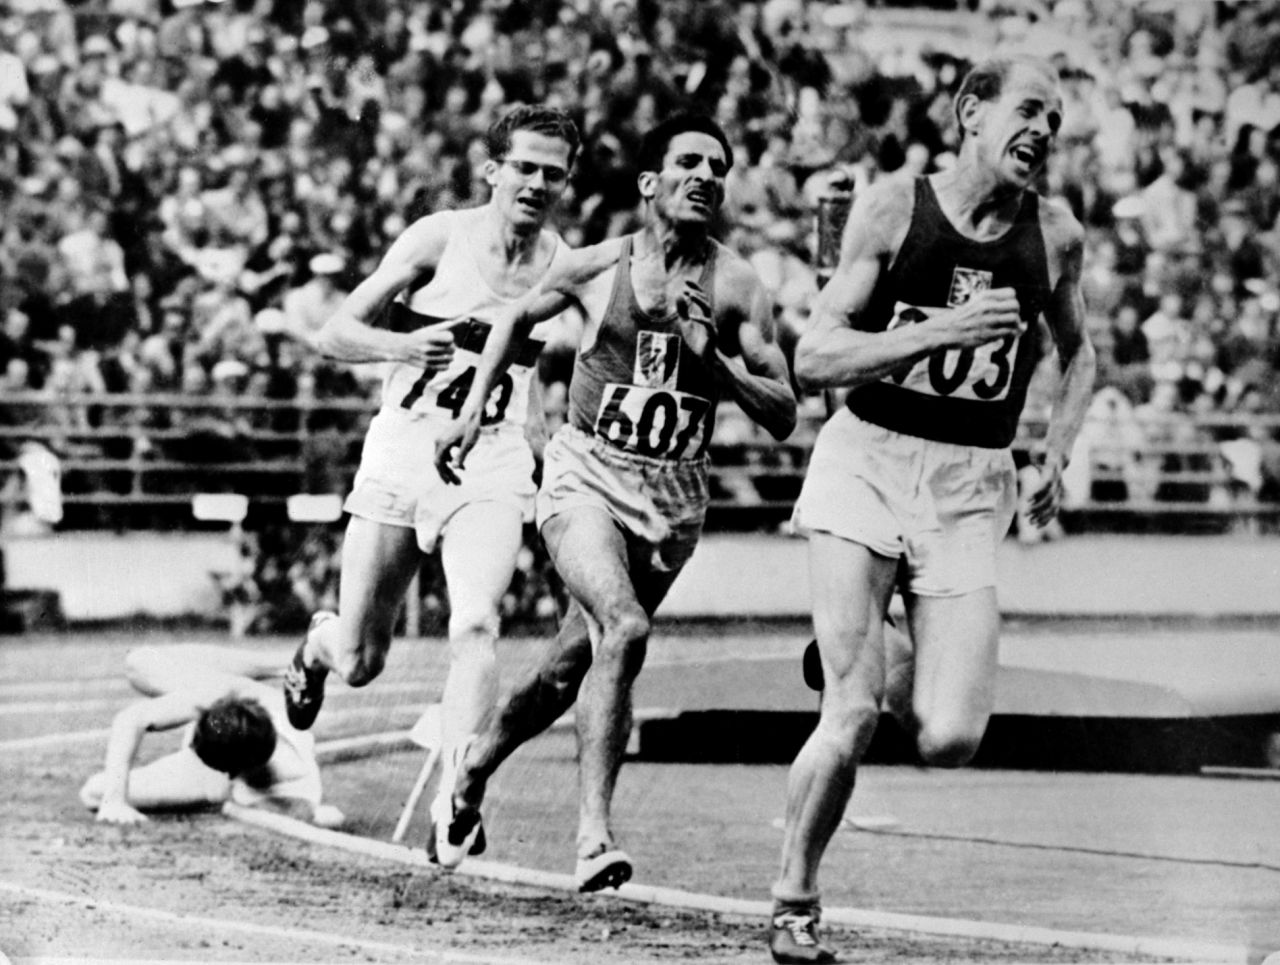 Emil Zatopek (right) of Czechoslovakia was the "iron man" in Finland's first Games, <a href="https://www.cnn.com/2012/08/11/sport/london-olympics-zatopek-marathon/" target="_blank">taking gold in the 5,000 and 10,000 meters and the marathon</a> -- the only Olympian to have achieved the grueling feat. 